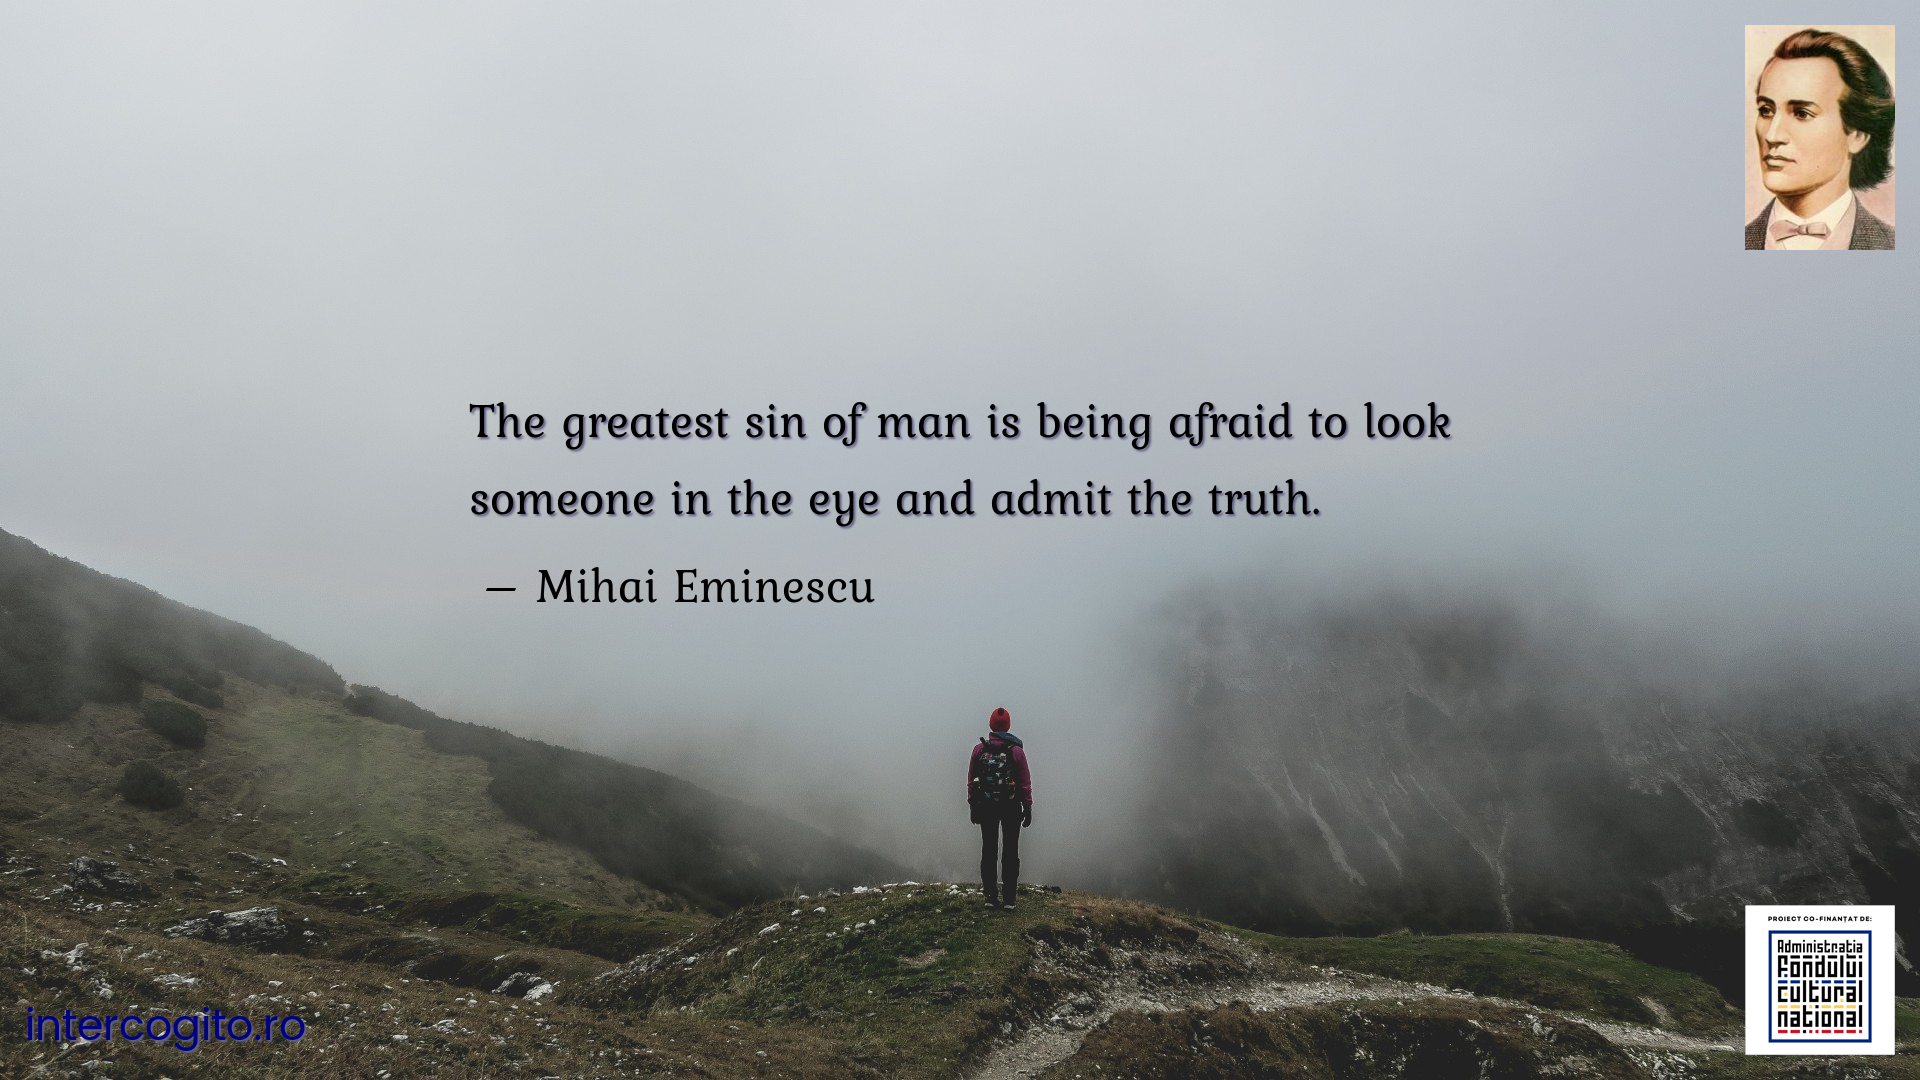 The greatest sin of man is being afraid to look someone in the eye and admit the truth.